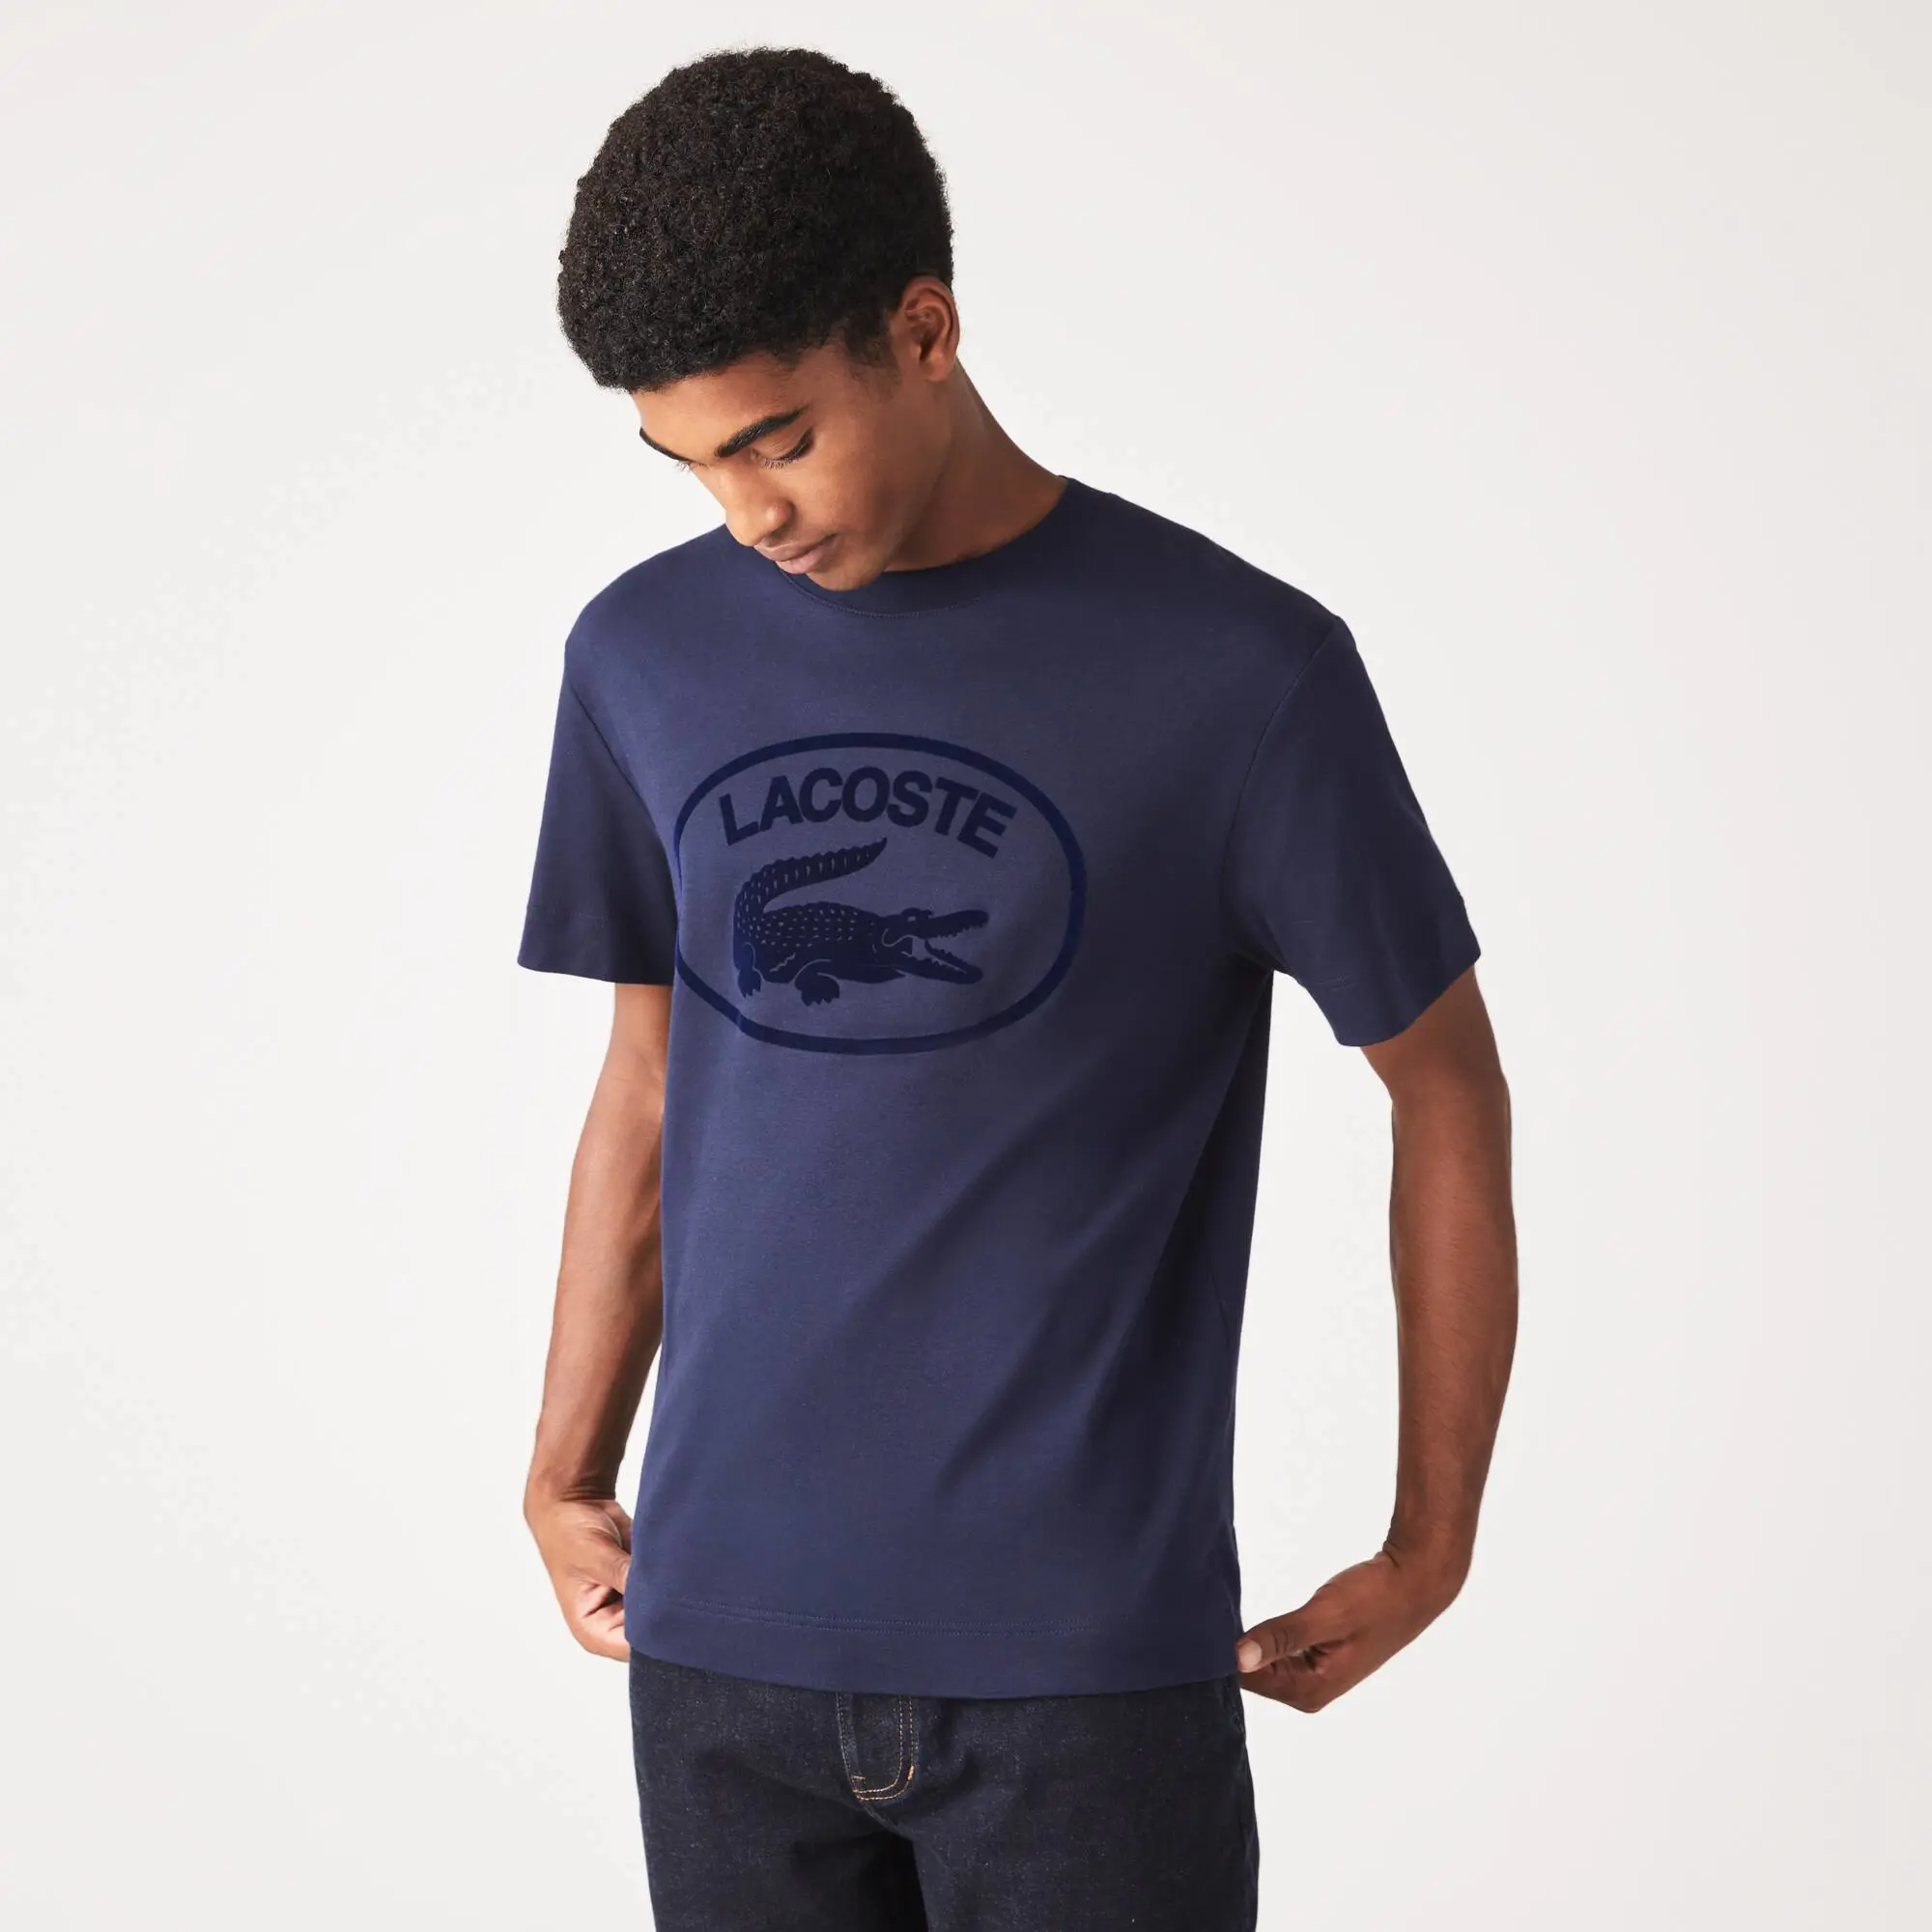 Lacoste Men's Lacoste Relaxed Fit Branded Cotton T-Shirt. 1